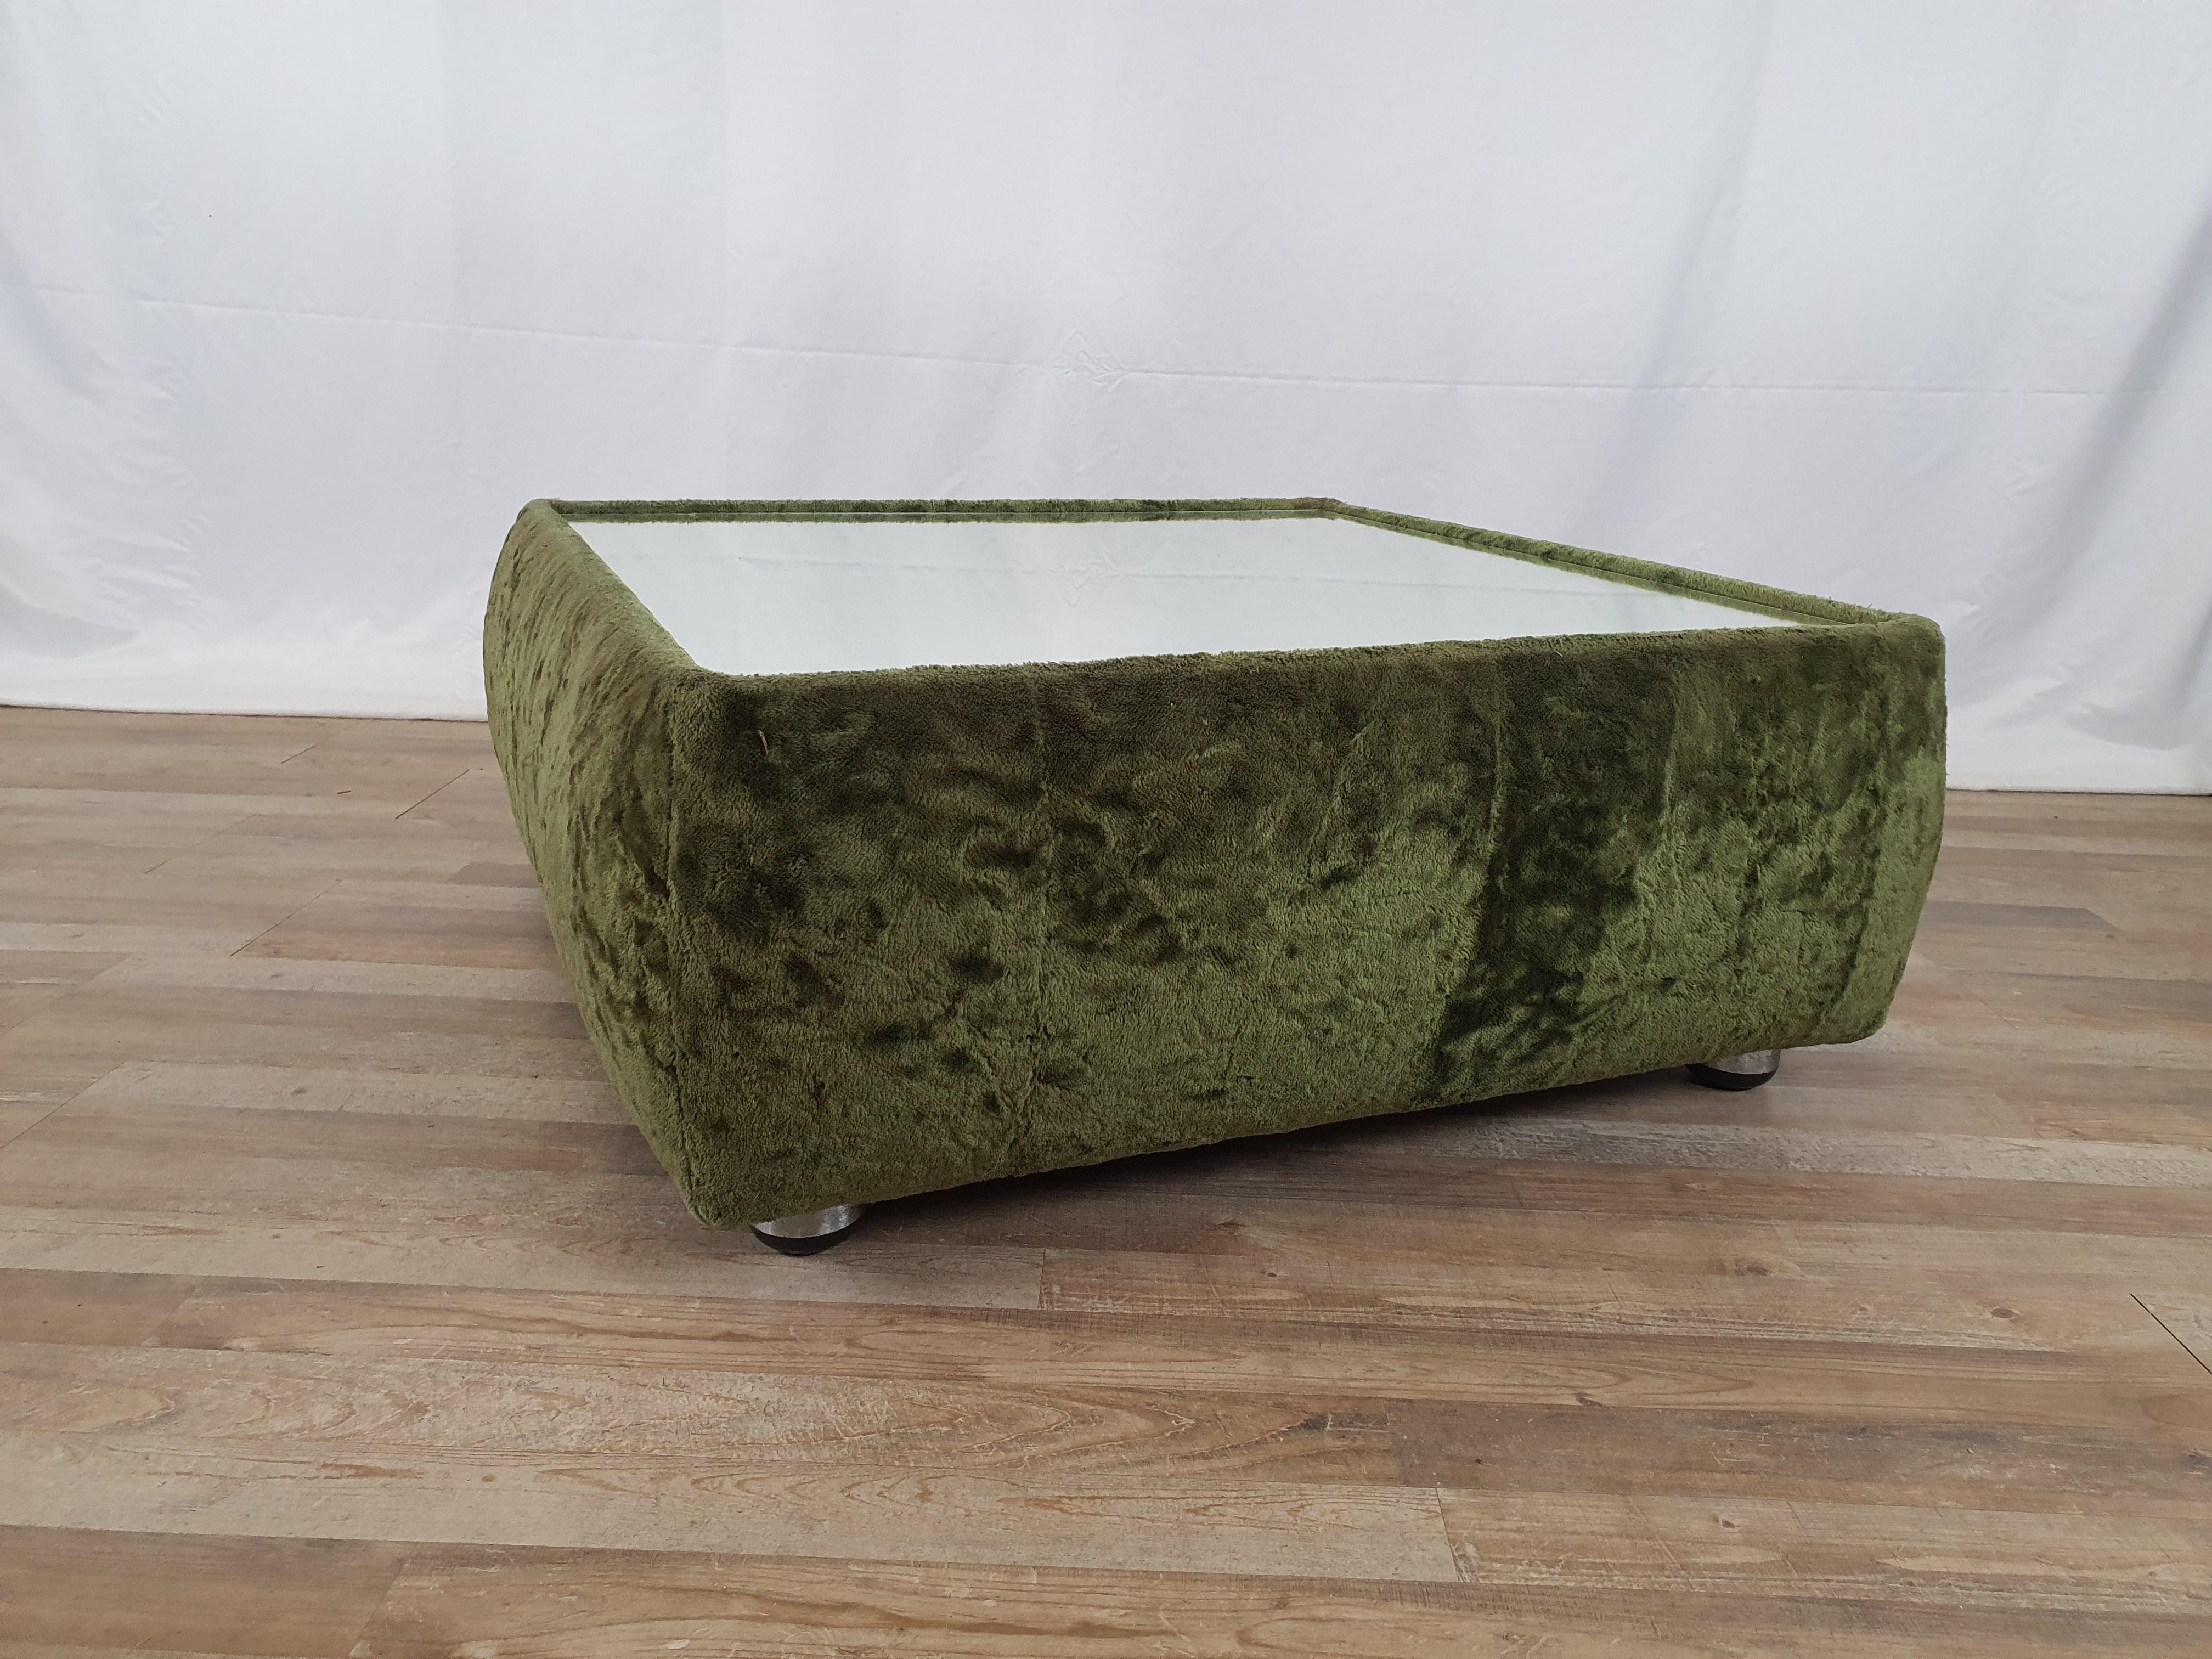 Fine and elegant upholstered coffee table in green chenille, modern and functional design originating from an Italian production around the 1970s.

The fabric is in green chenille, the table is supported by feet in aluminum and plastic and has an